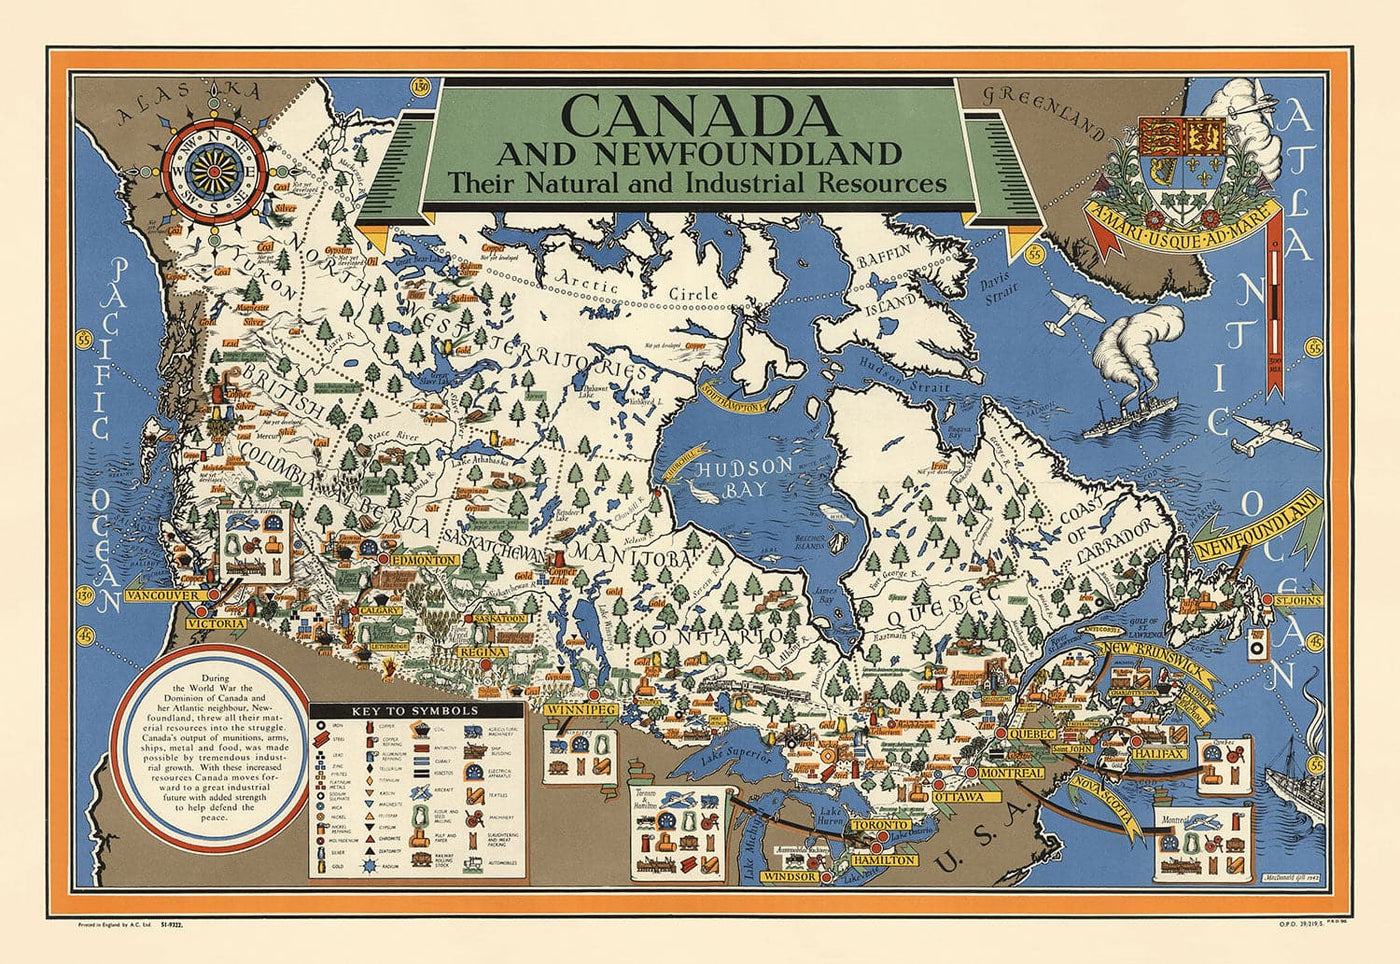 Old Map of Canada, 1942 by Max Gill - World War 2 Map of Natural & Industrial Resources